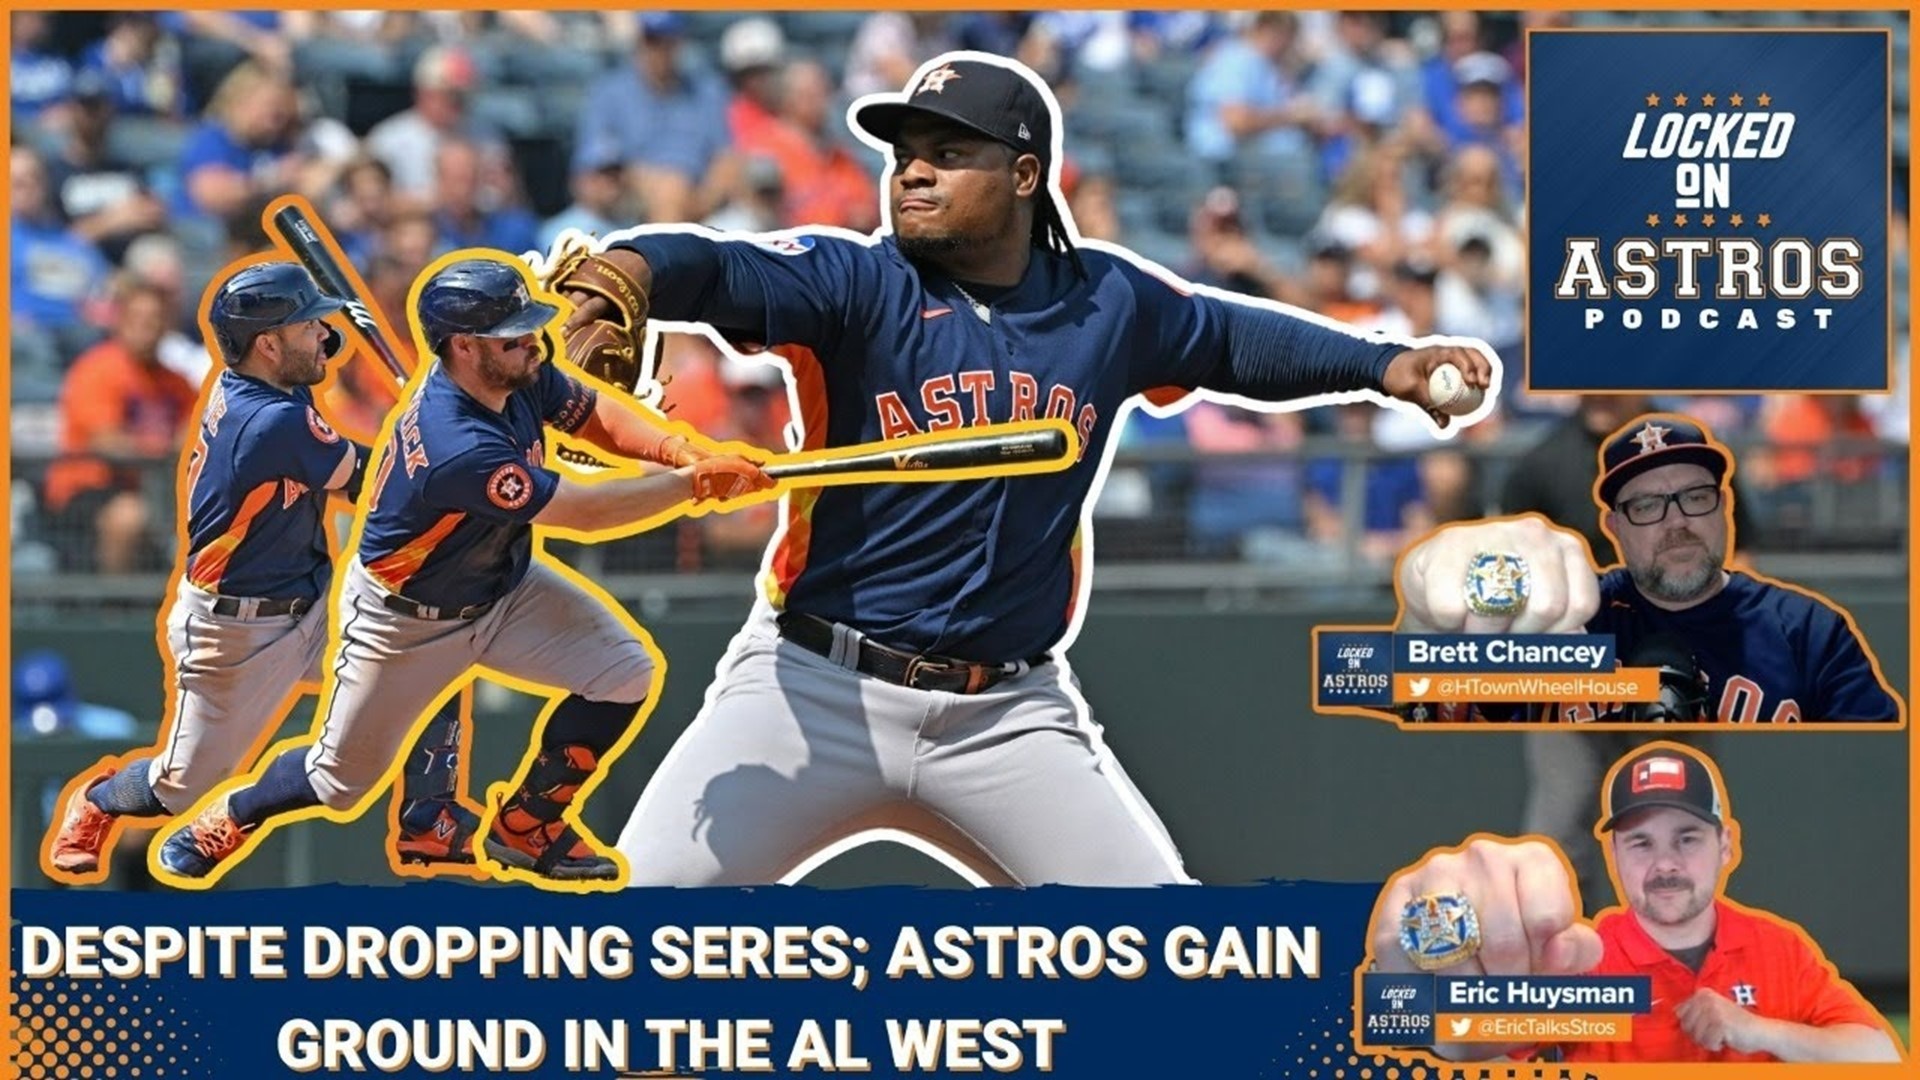 Astros gain ground in West, despite dropping series to Royals